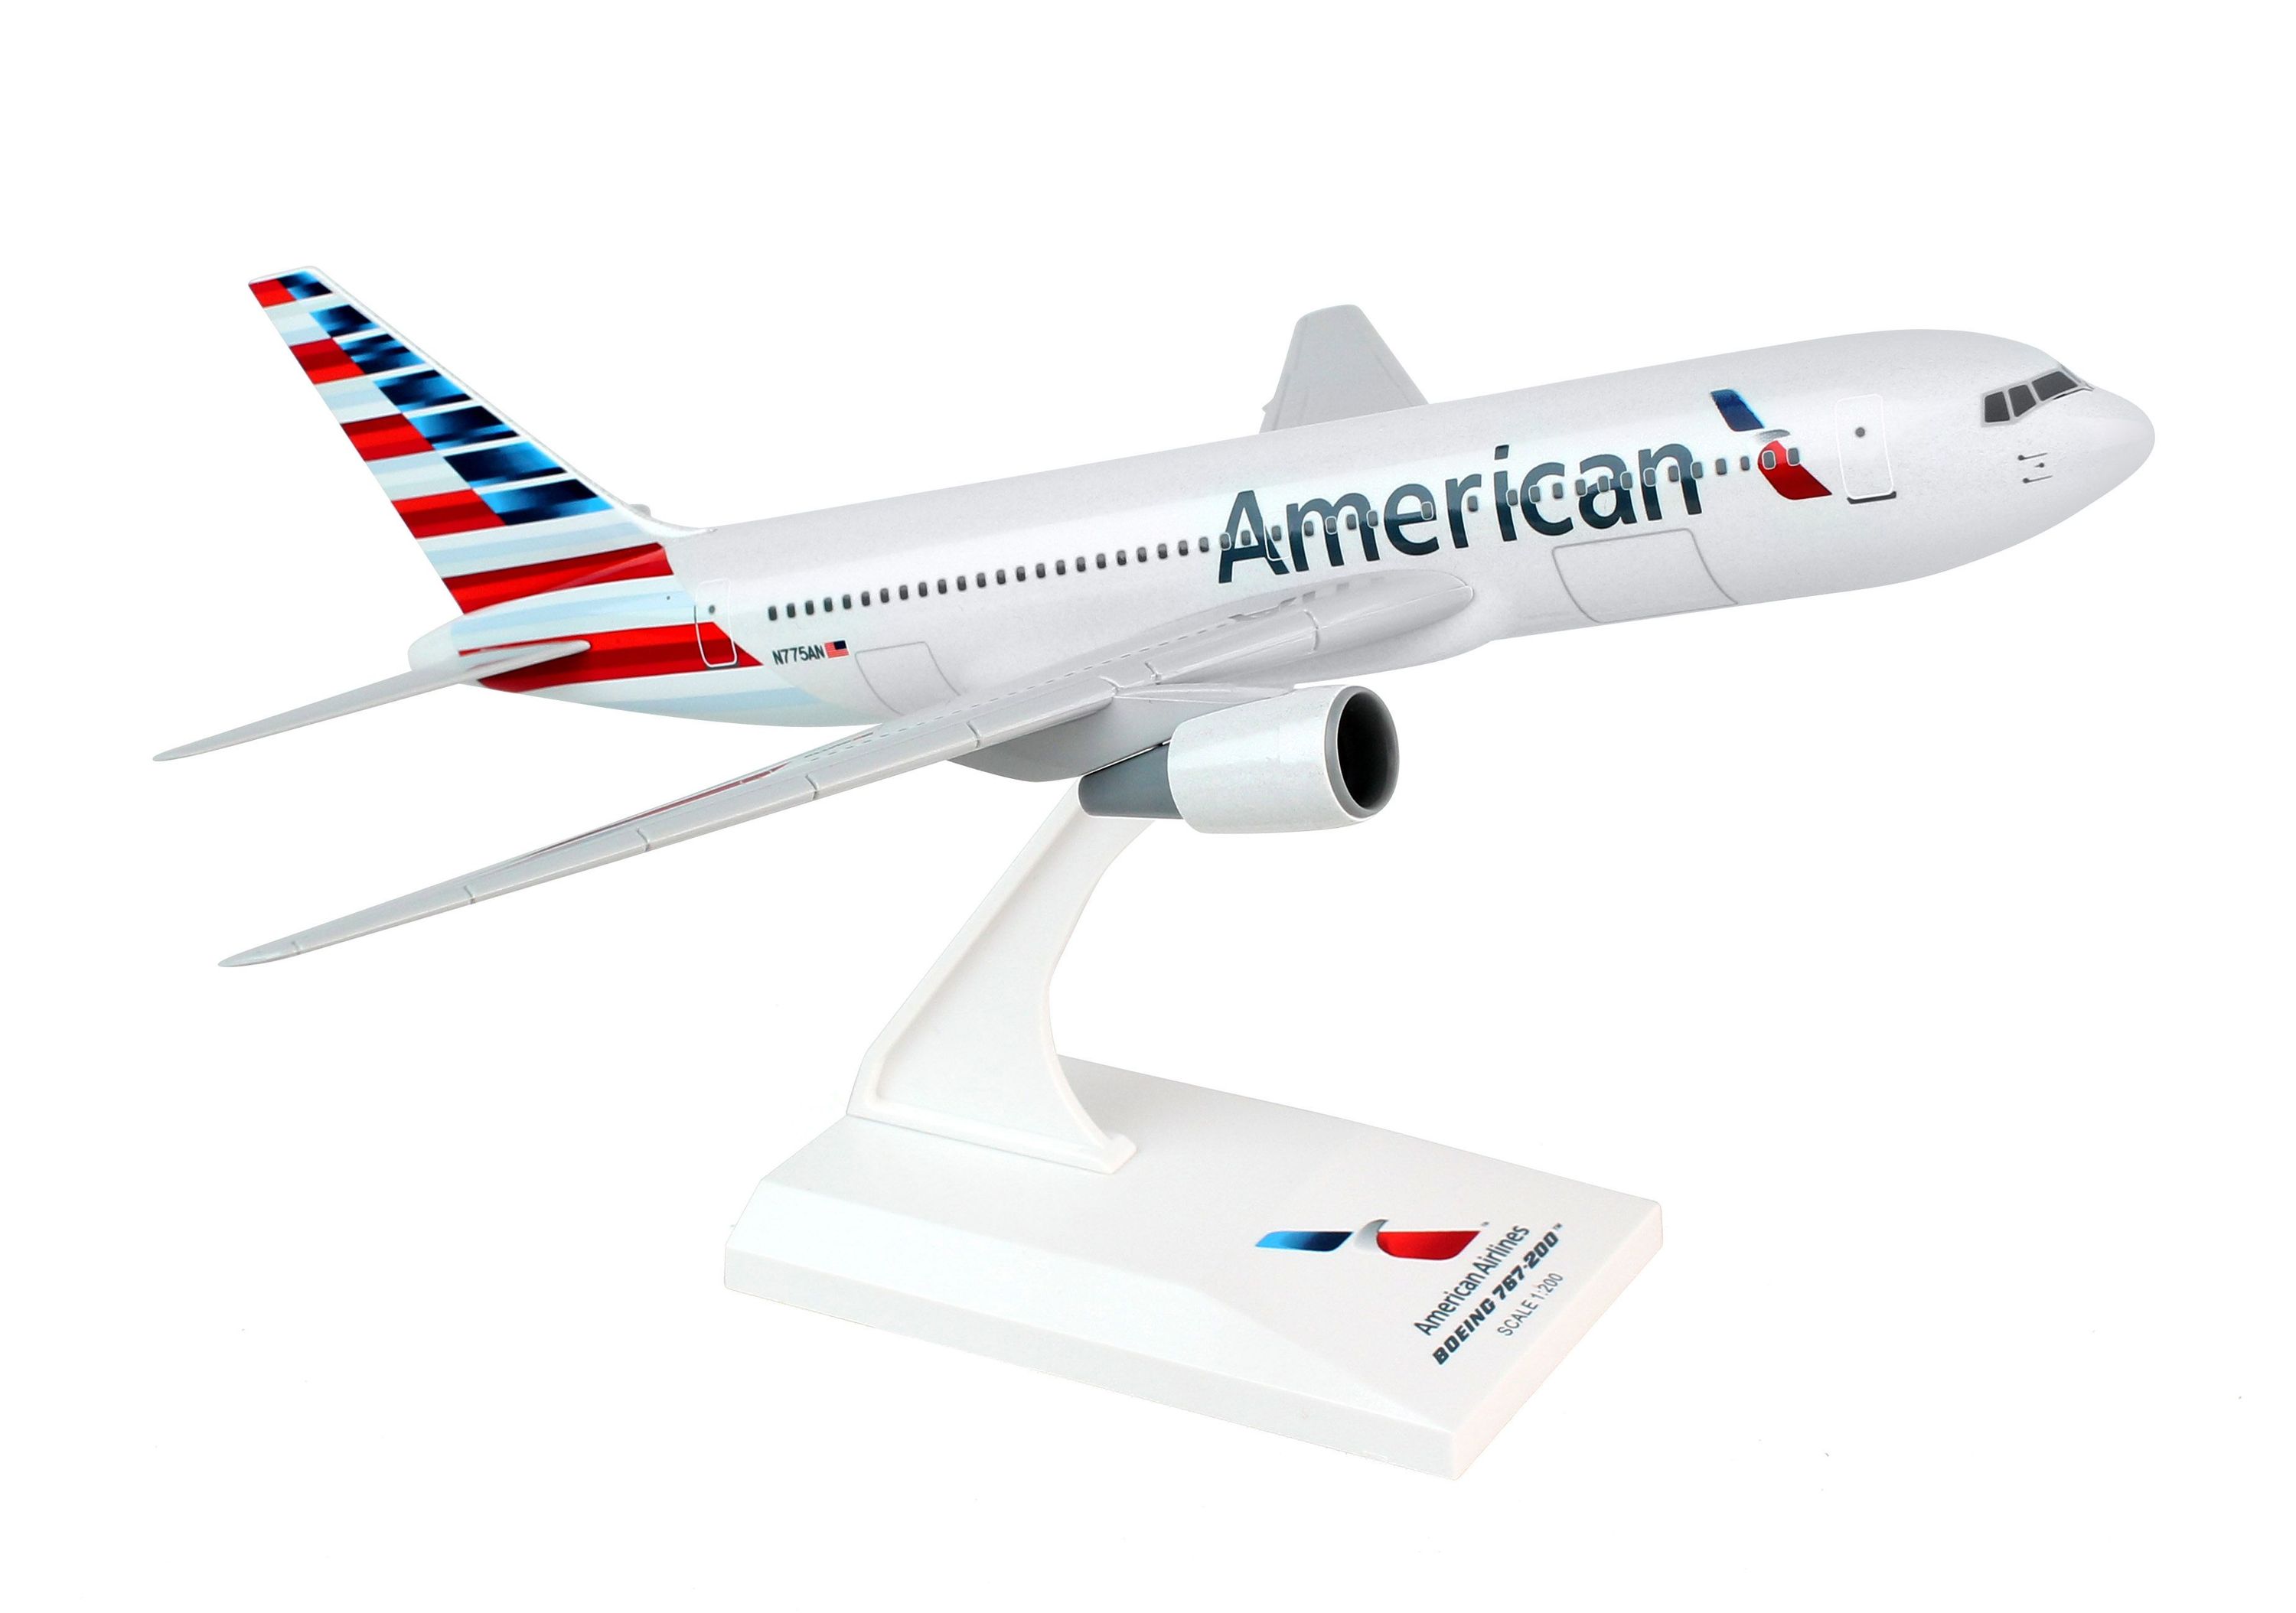 SkyMarks Flugzeugmodell American Airlines Boeing 767-200 Maßstab 1:200